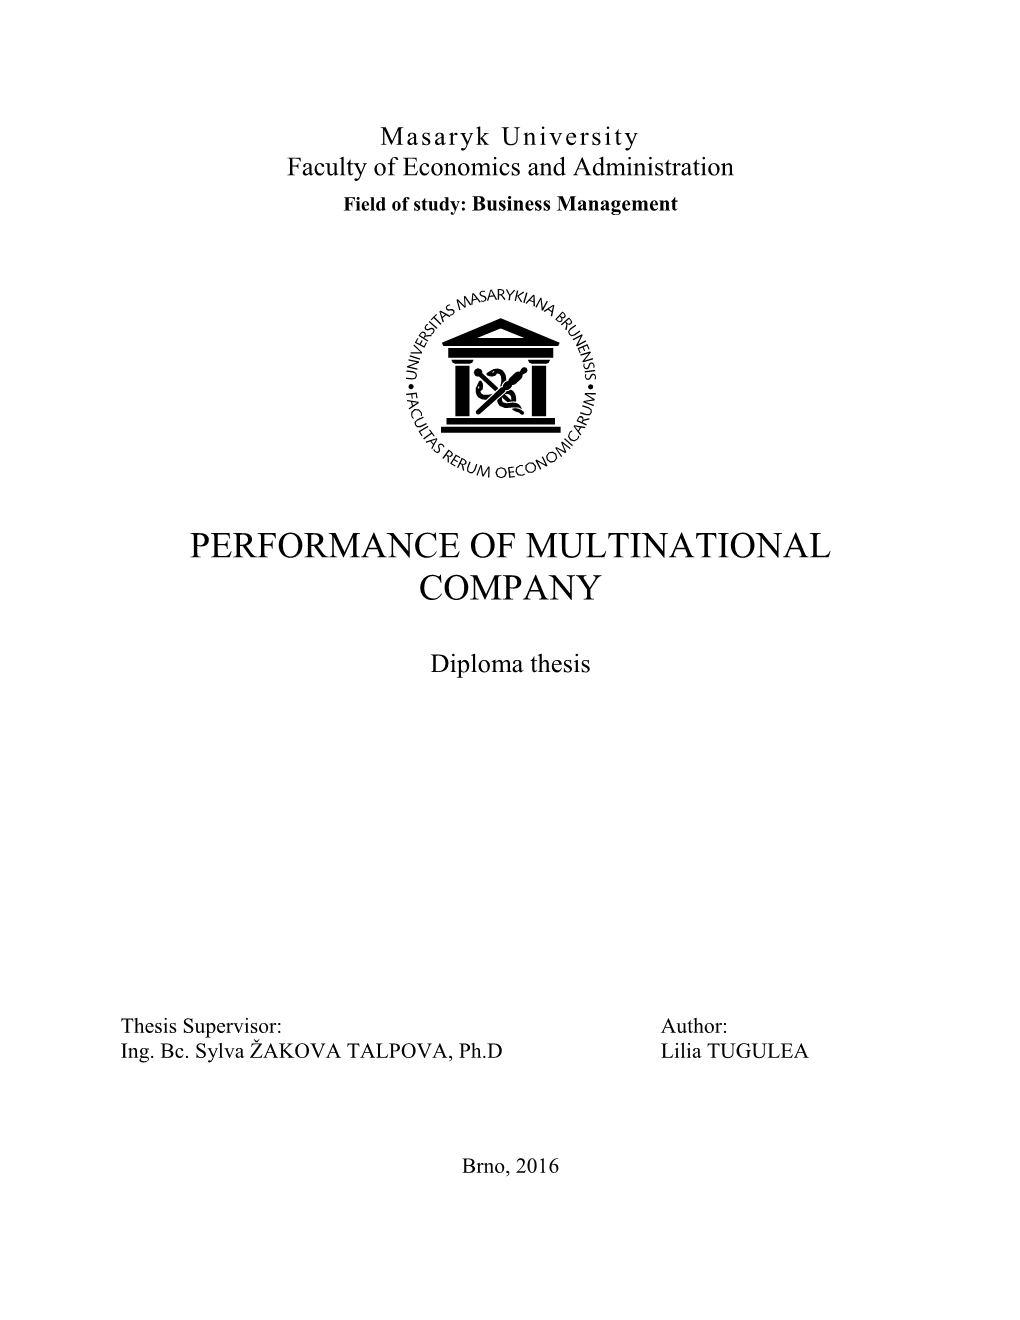 Performance of Multinational Company